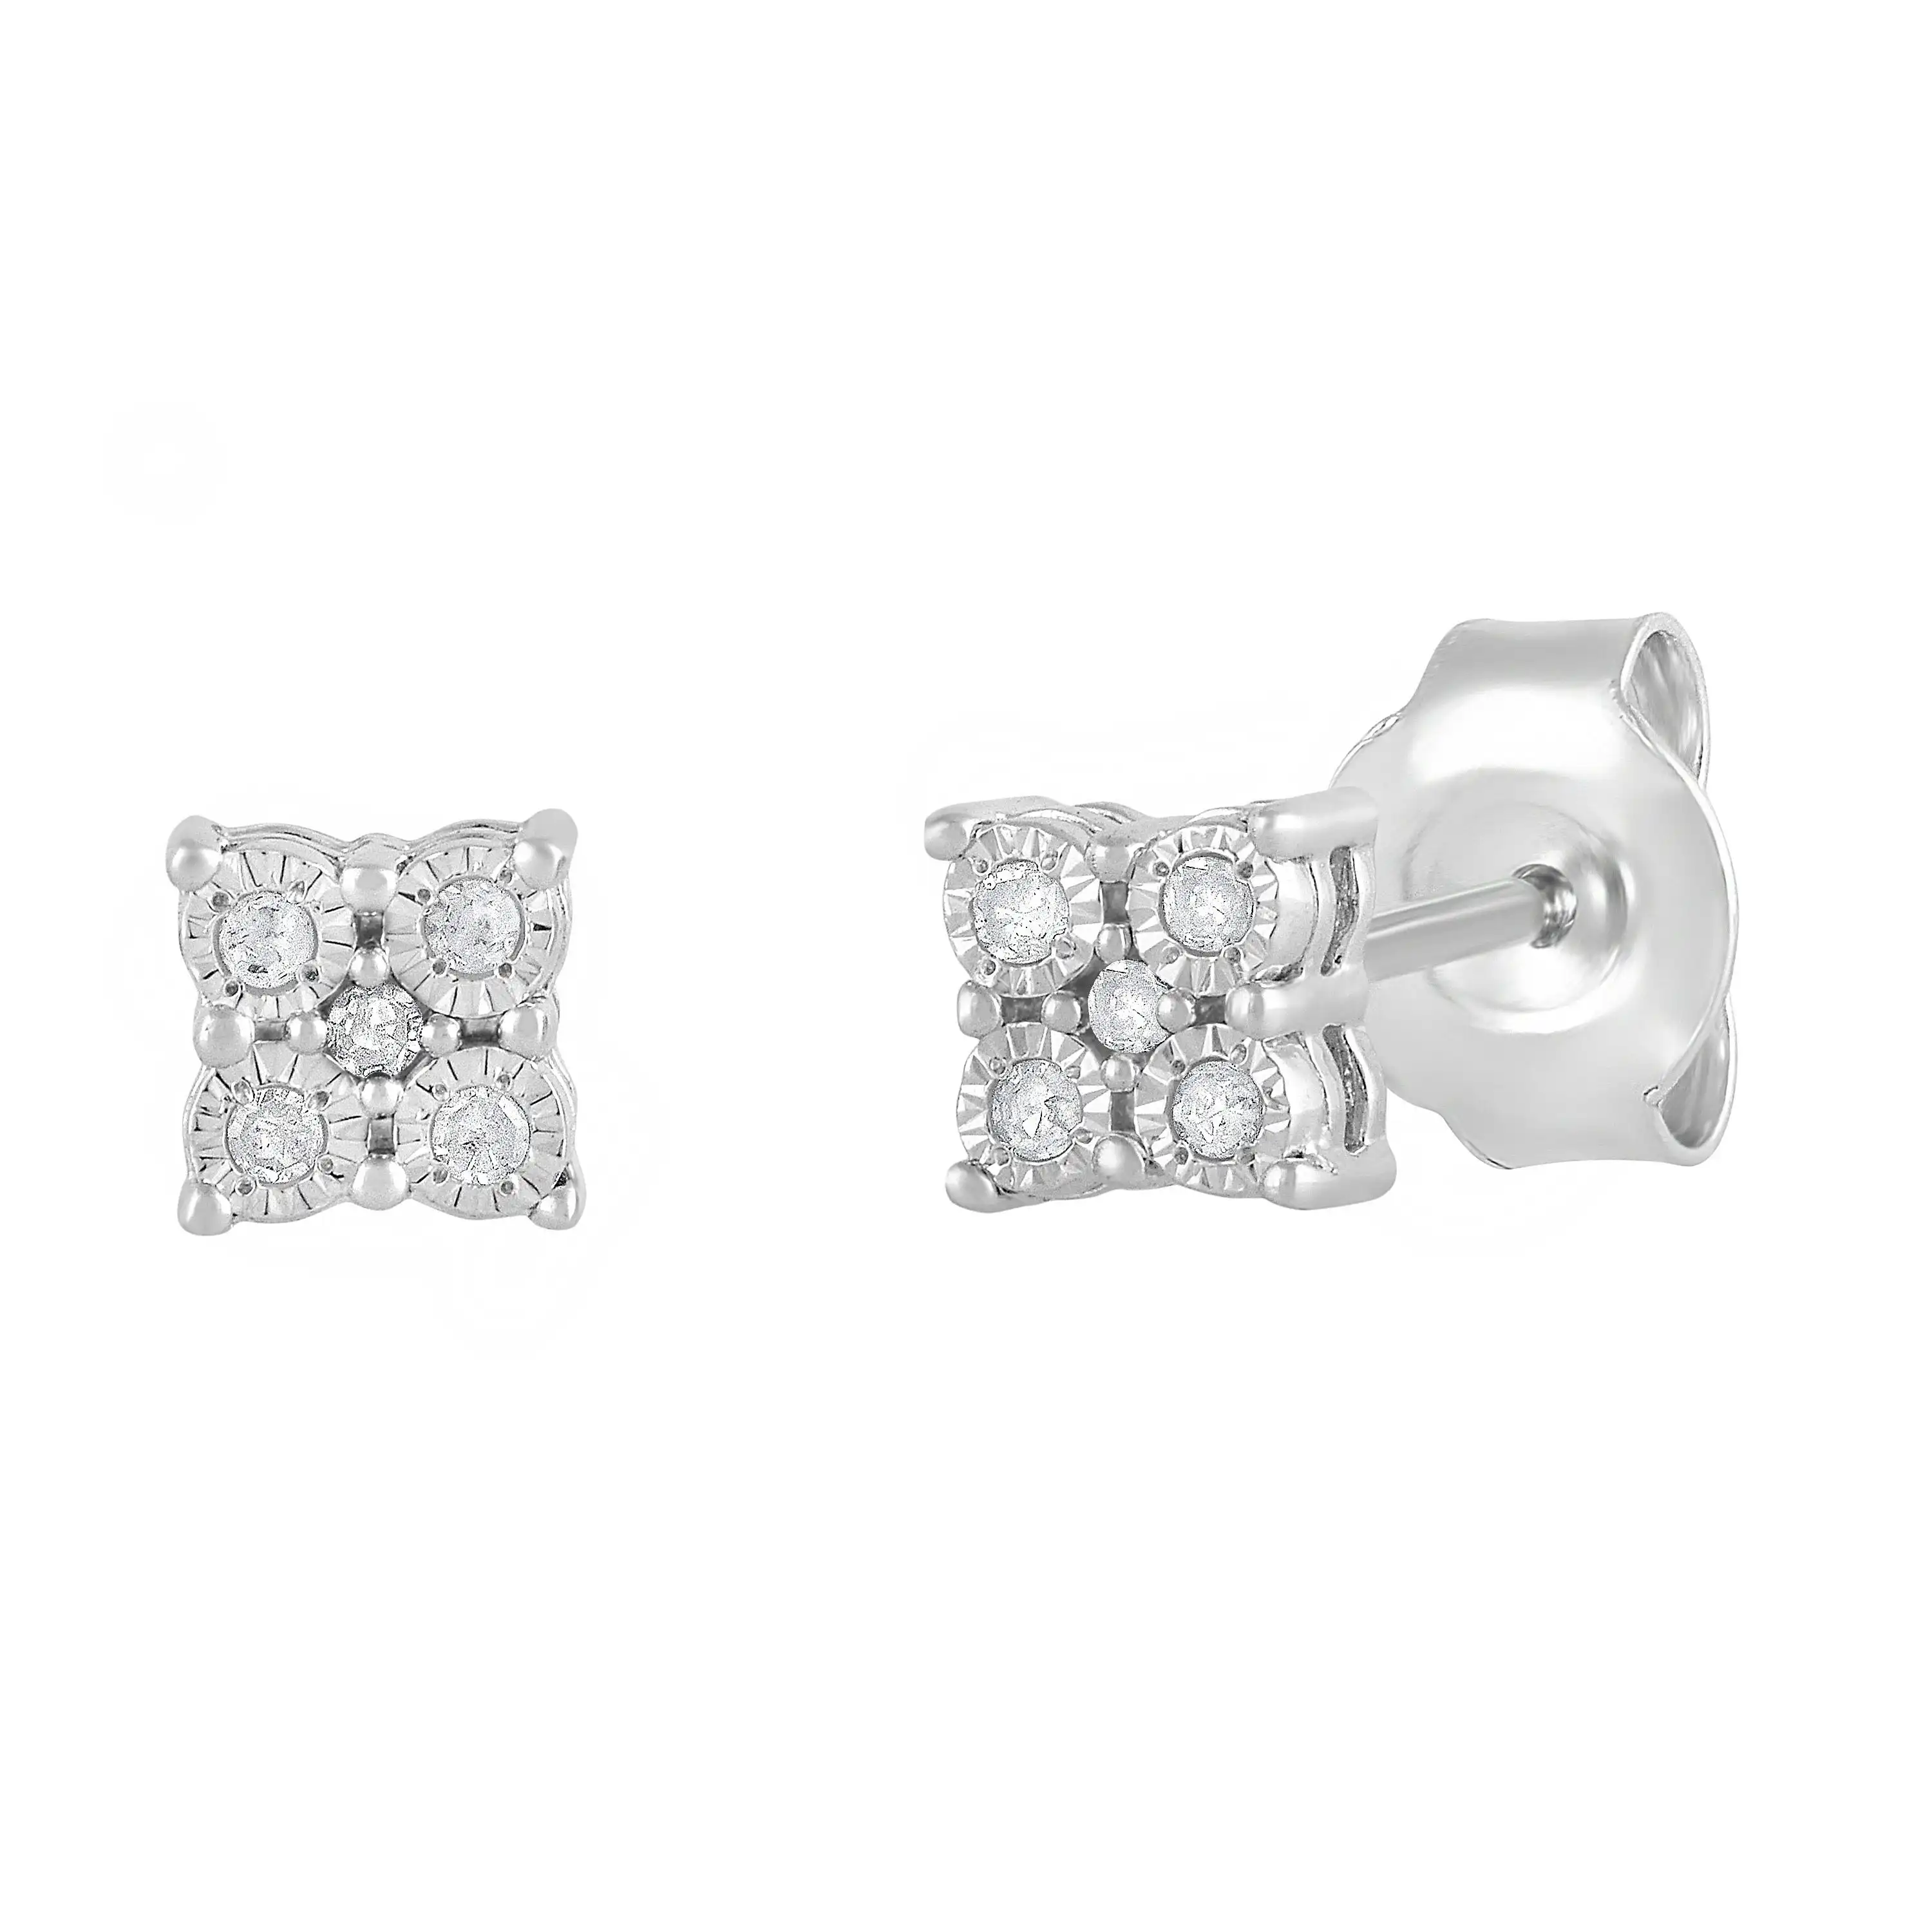 Square Look Stud Earrings with 0.05ct of Diamonds in Sterling Silver